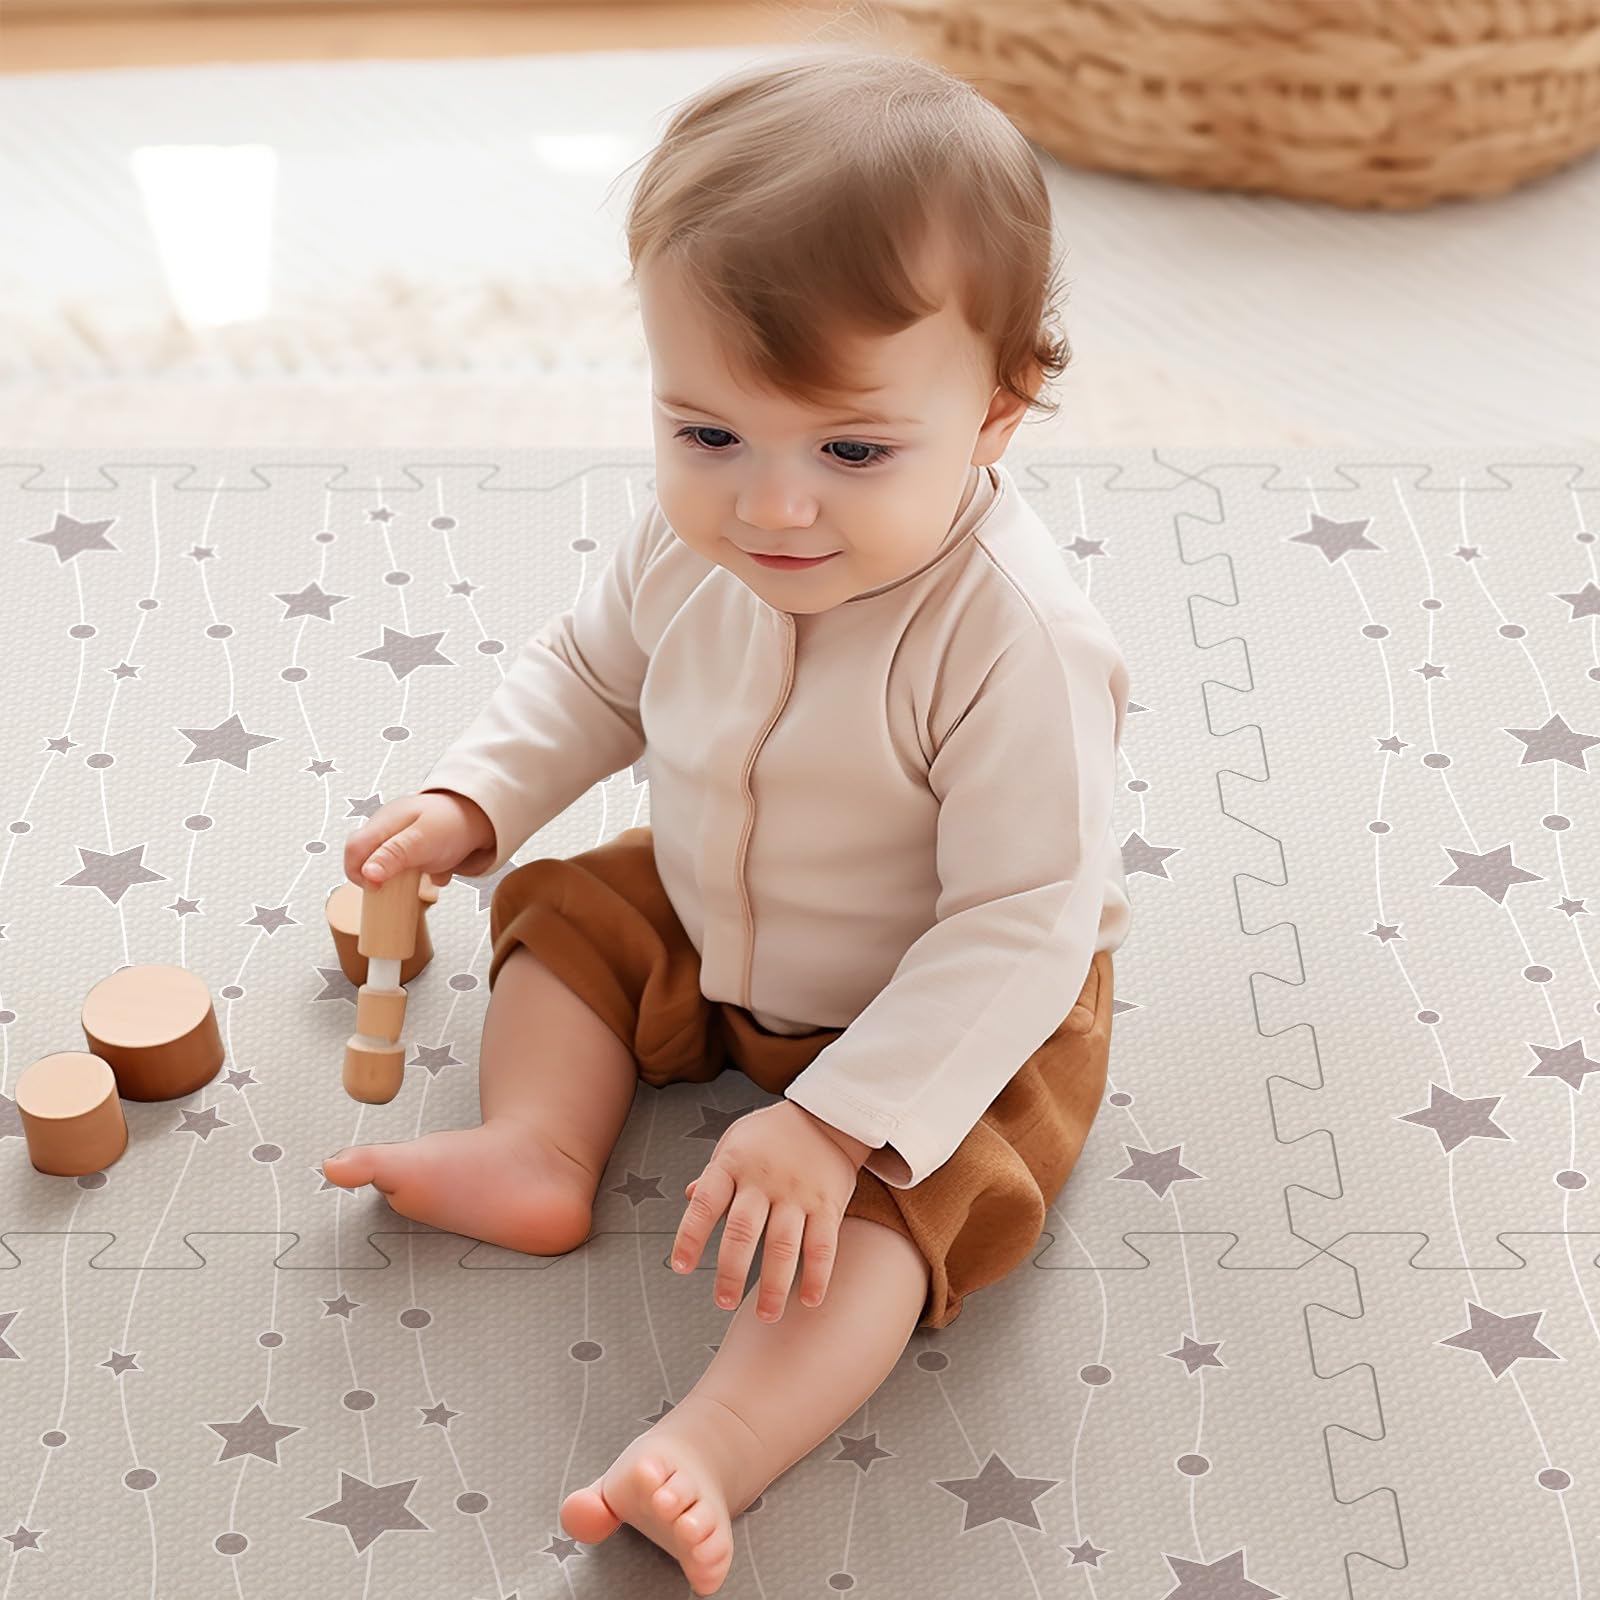 PIGLOG Baby Play Mat - Interlocking Foam Floor Tiles Foam Play Mat 72x48 Inches Soft Non Toxic Puzzle Mat for Infants and Toddlers Tummy Time Mat Crawling Mat (Star)